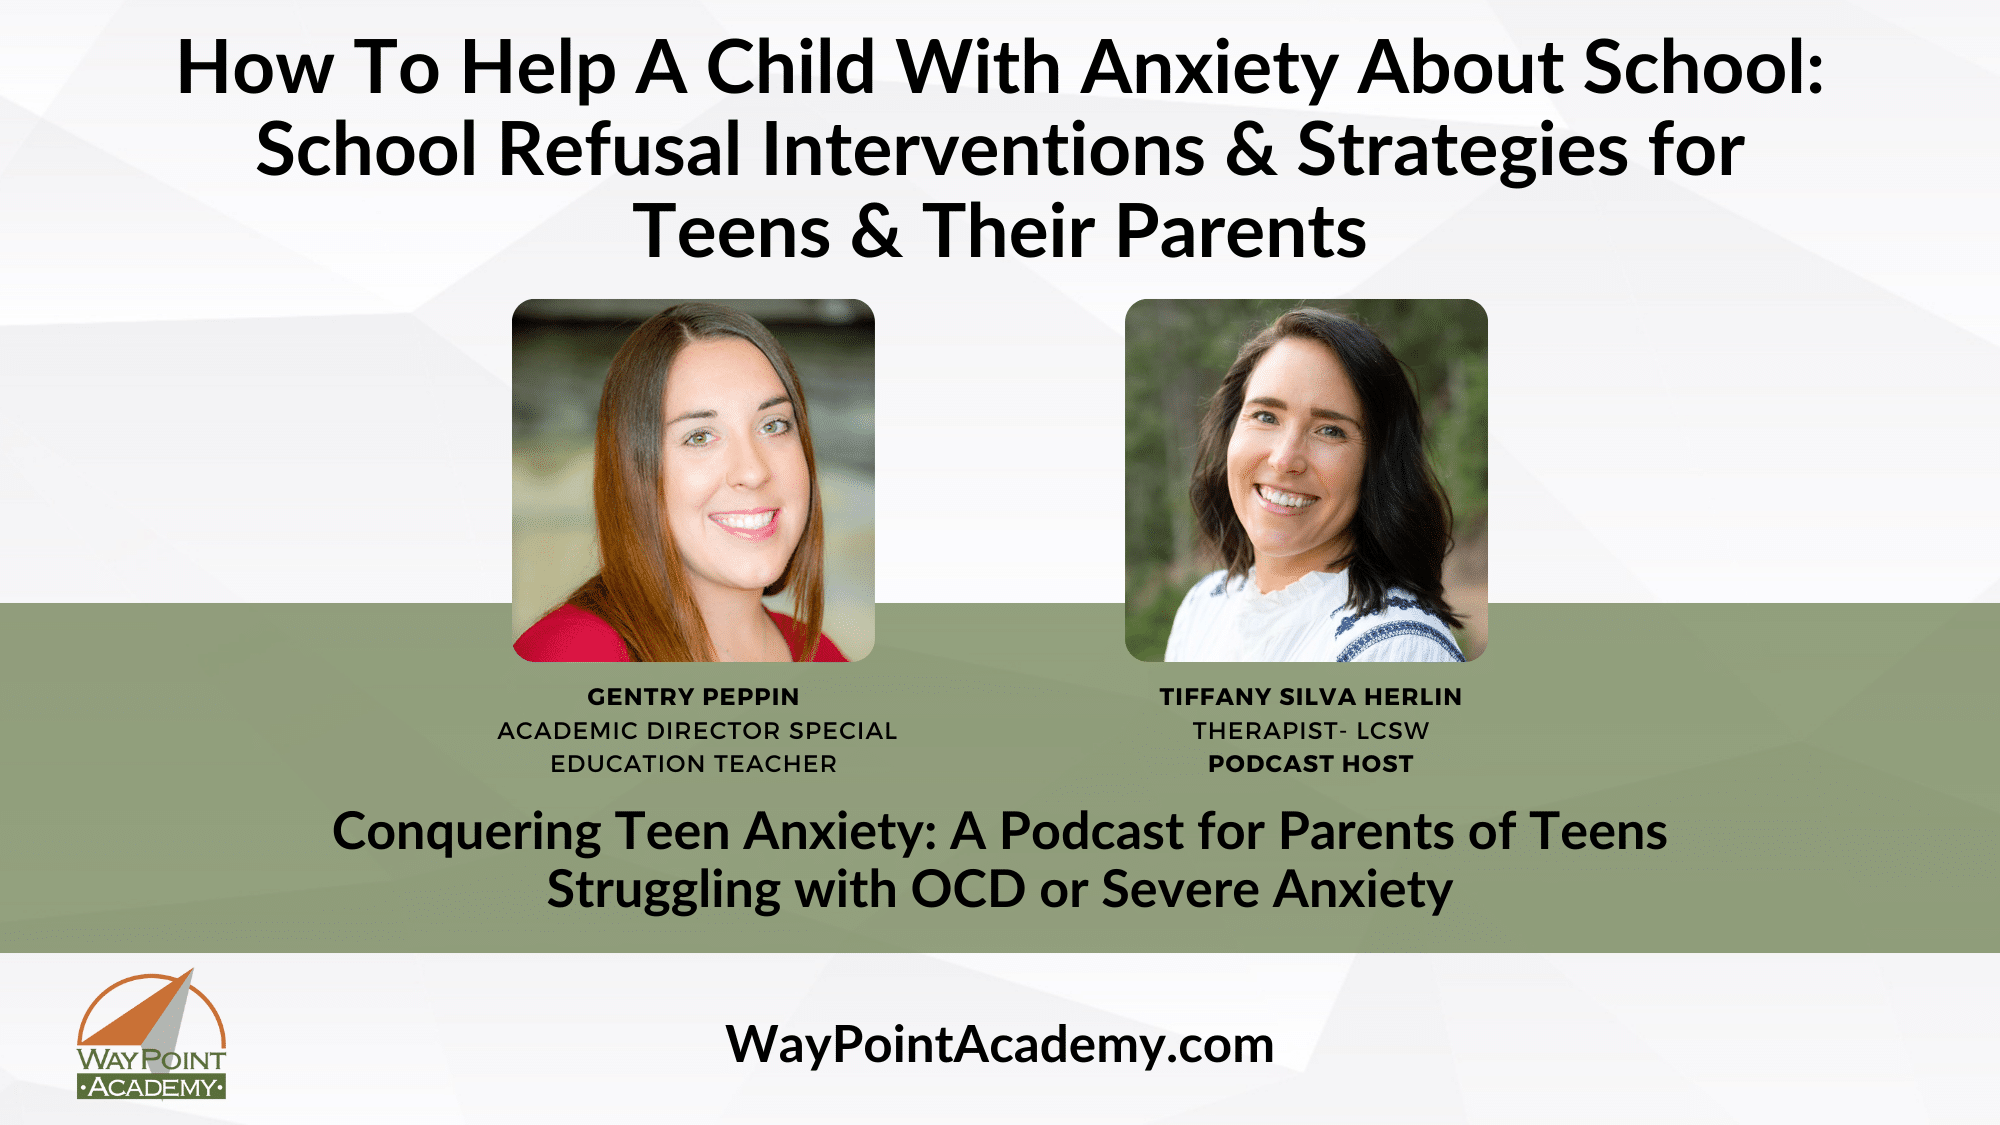 An image promoting WayPoint Academy's Podcast on School Refusal. This Episode is called, How To Help A Child With Anxiety About School: School Refusal Interventions for Teens & Their Parents"